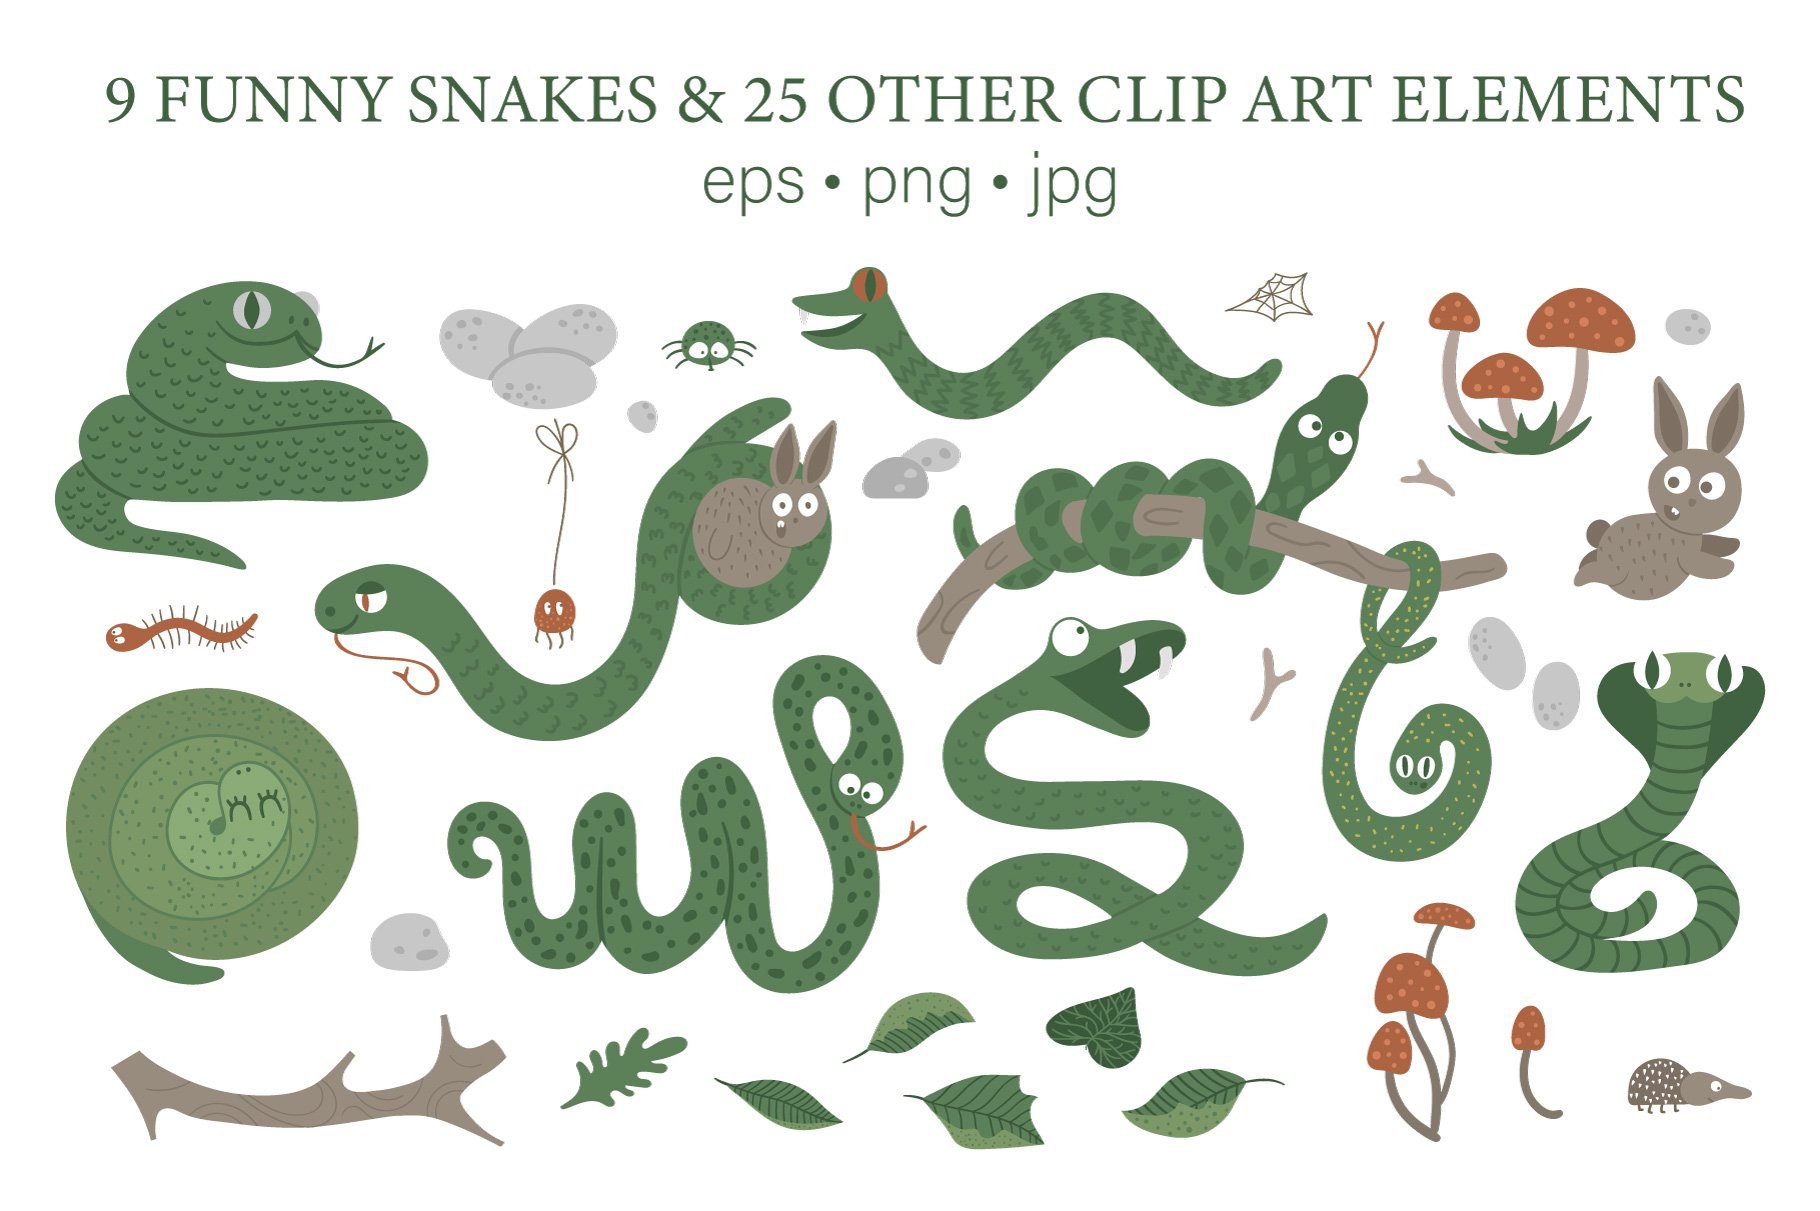 Playful image of snakes and other animals living in the forest on a white background.